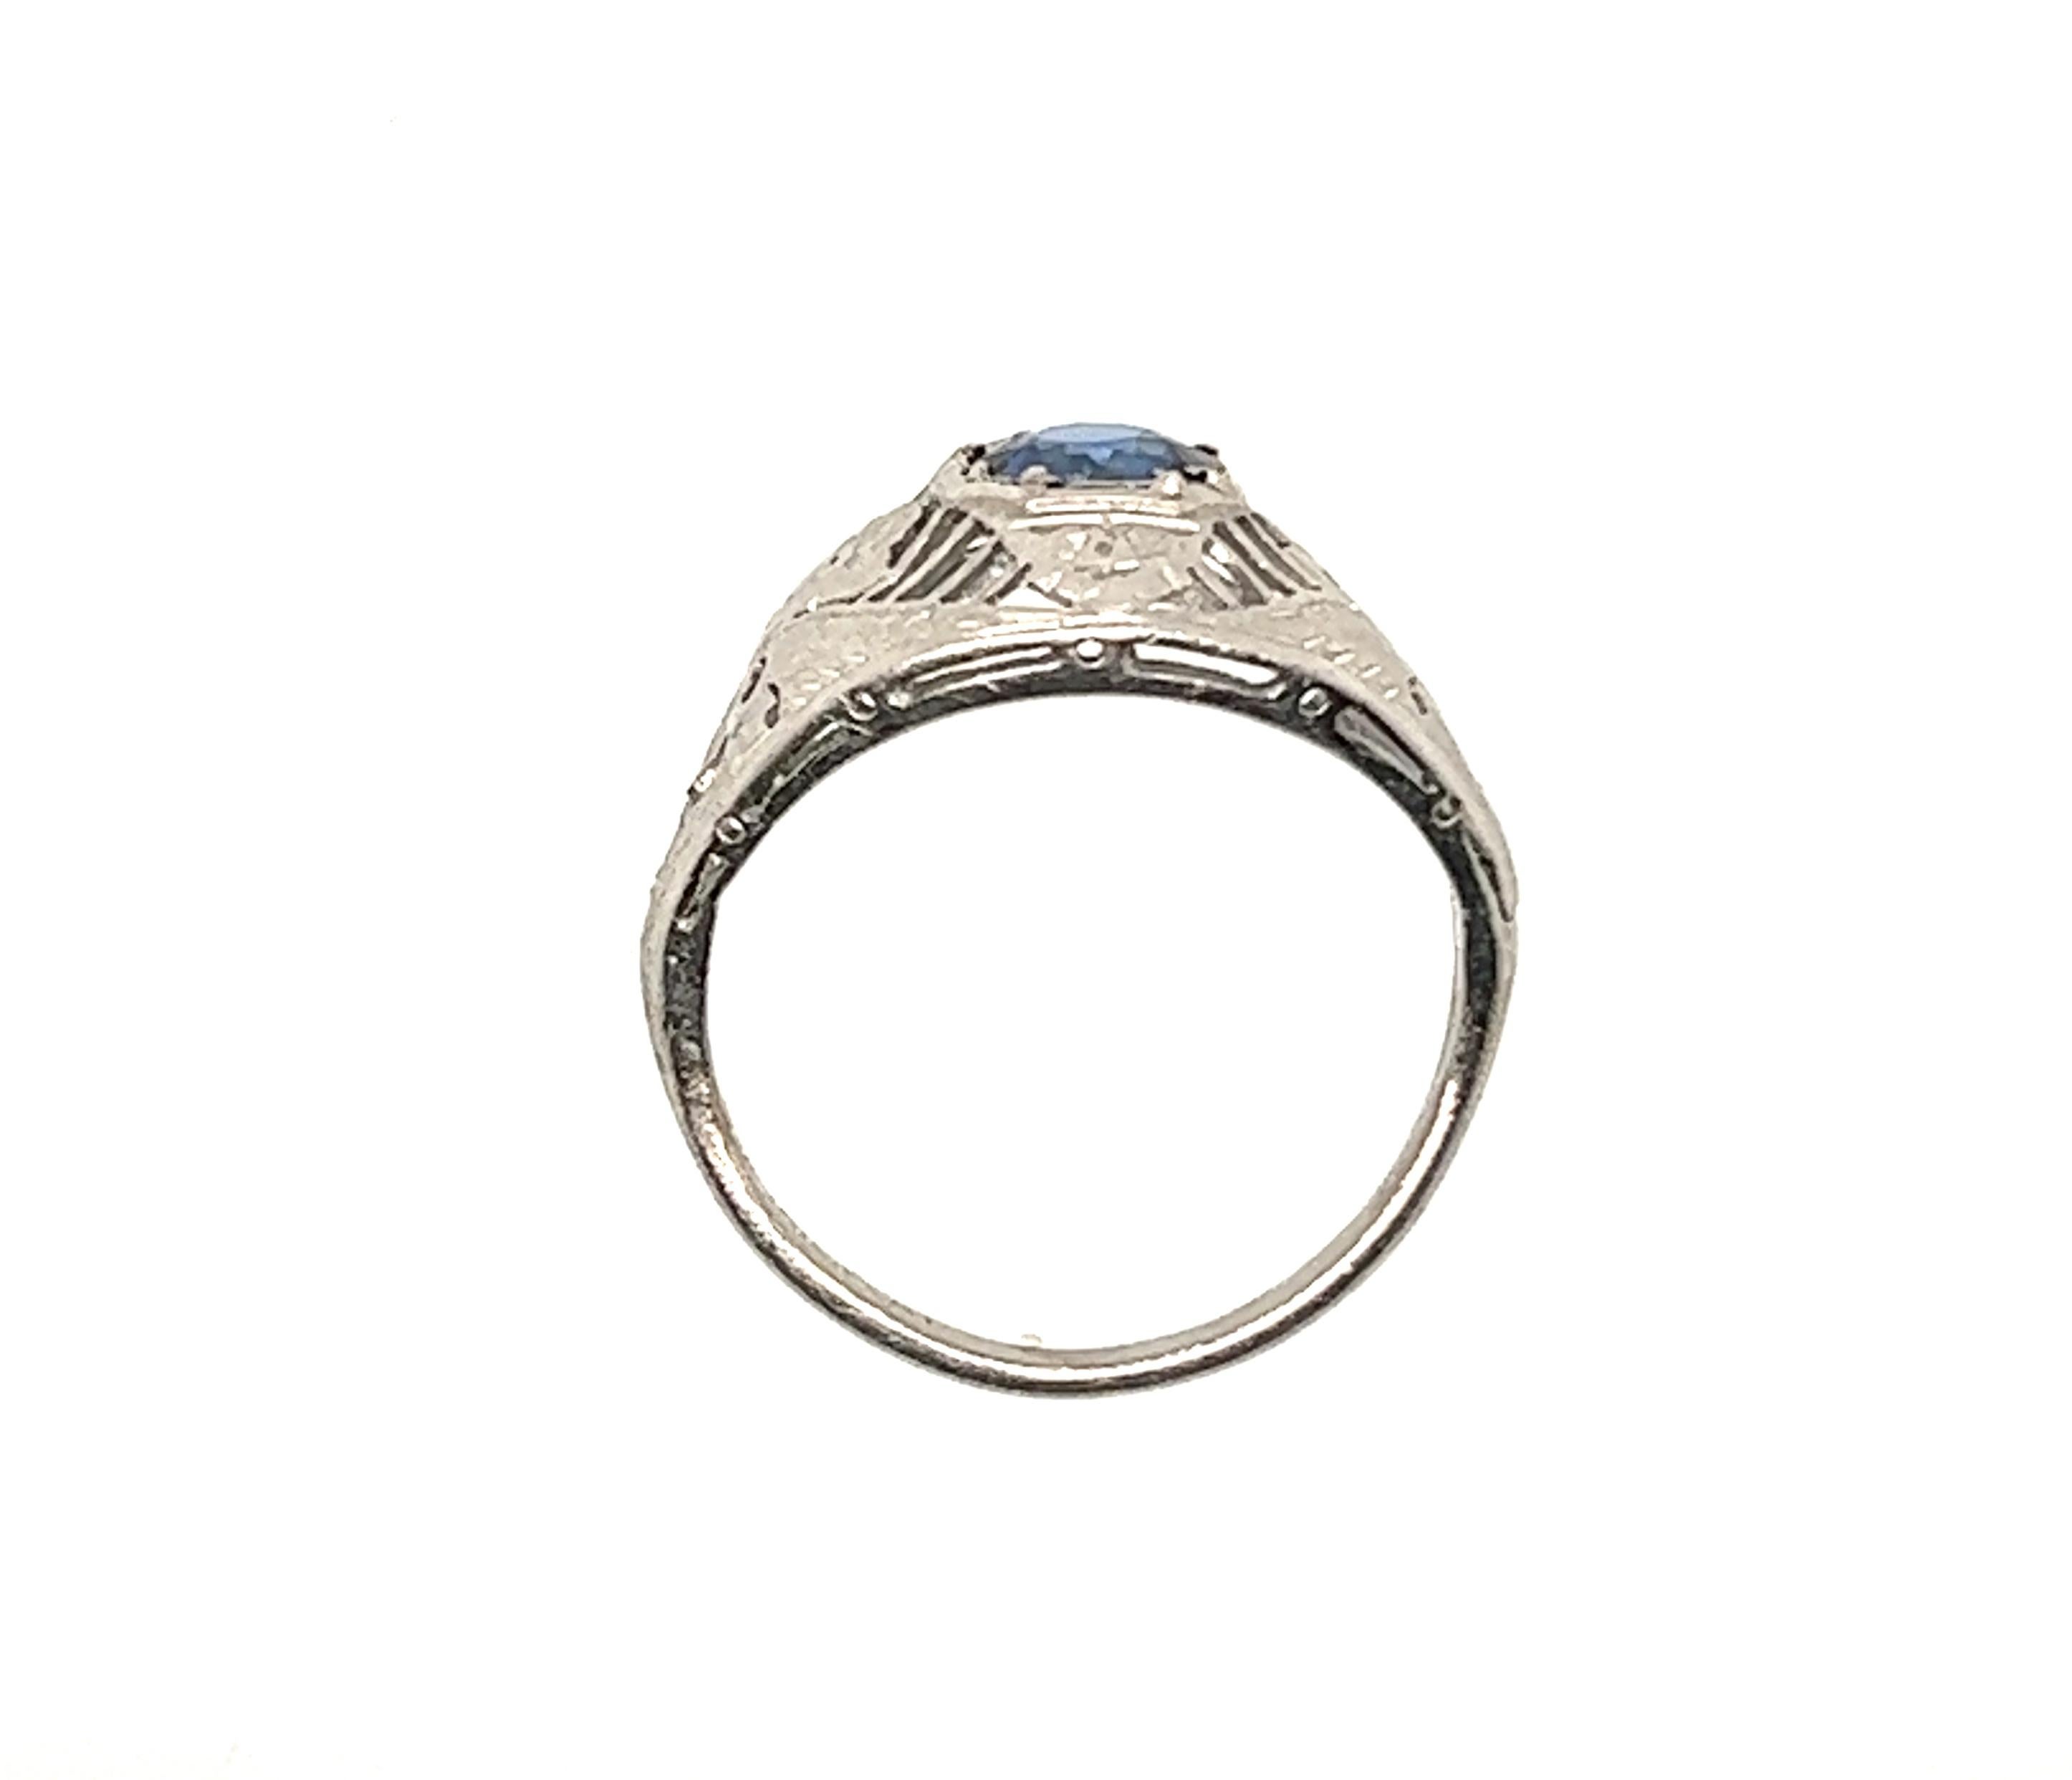 Genuine Original from the 1920'sArt Deco Sapphire Ring .52ct Vintage Antique Flowers Platinum 


Featuring a Gorgeous .52ct Genuine Natural Blue Round Sapphire Center

Incredible Hand Engraved Flowers

Stunning Hand Filigree

Classic Bombe Shaped